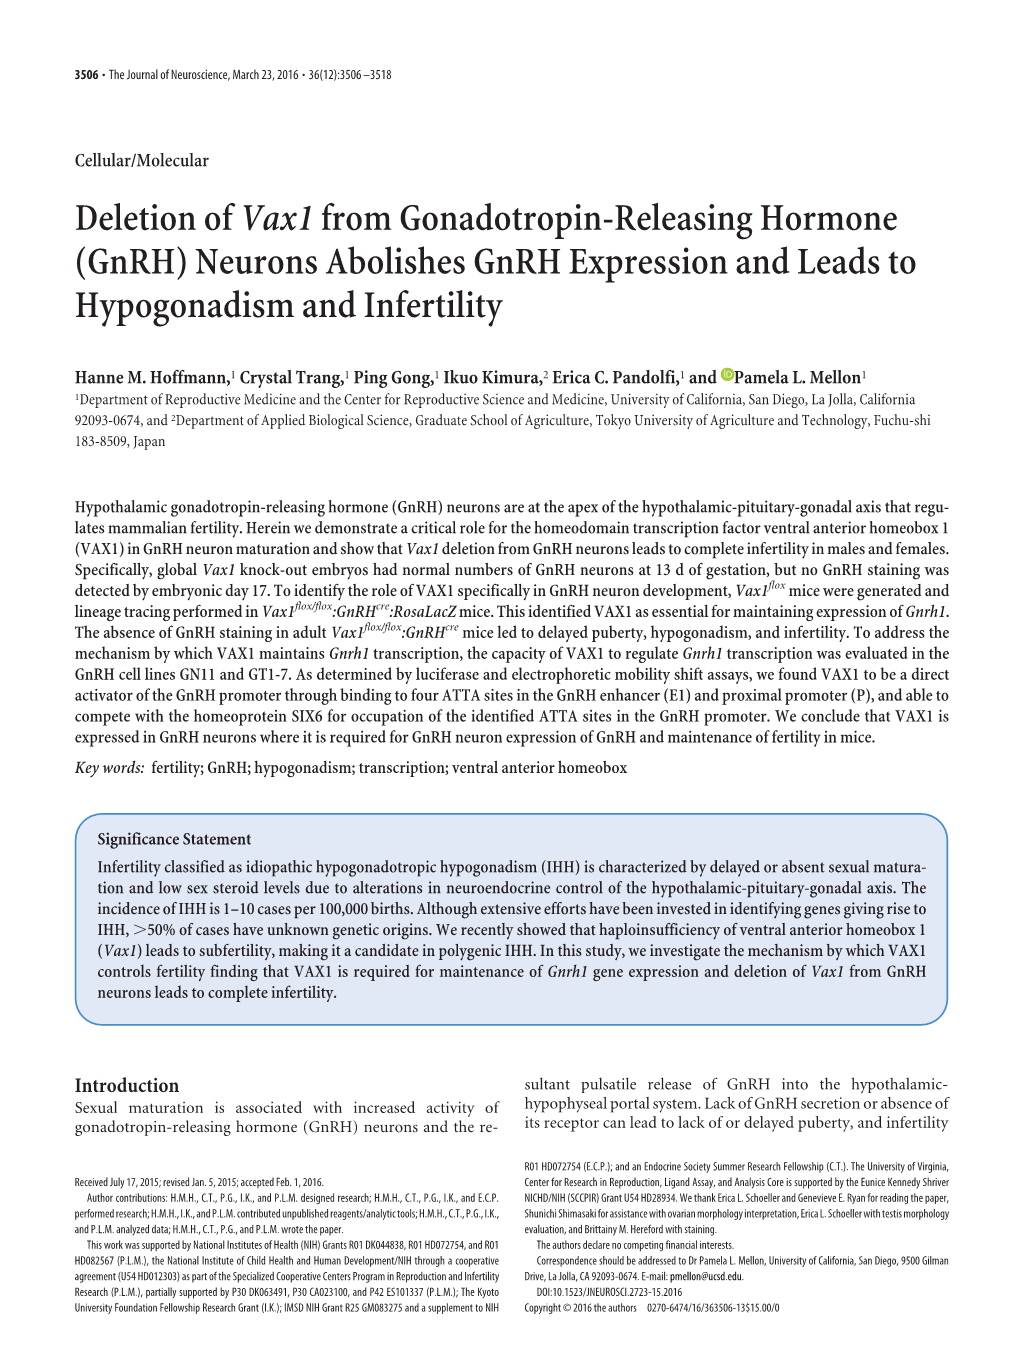 Deletion of Vax1 from Gonadotropin-Releasing Hormone (Gnrh) Neurons Abolishes Gnrh Expression and Leads to Hypogonadism and Infertility